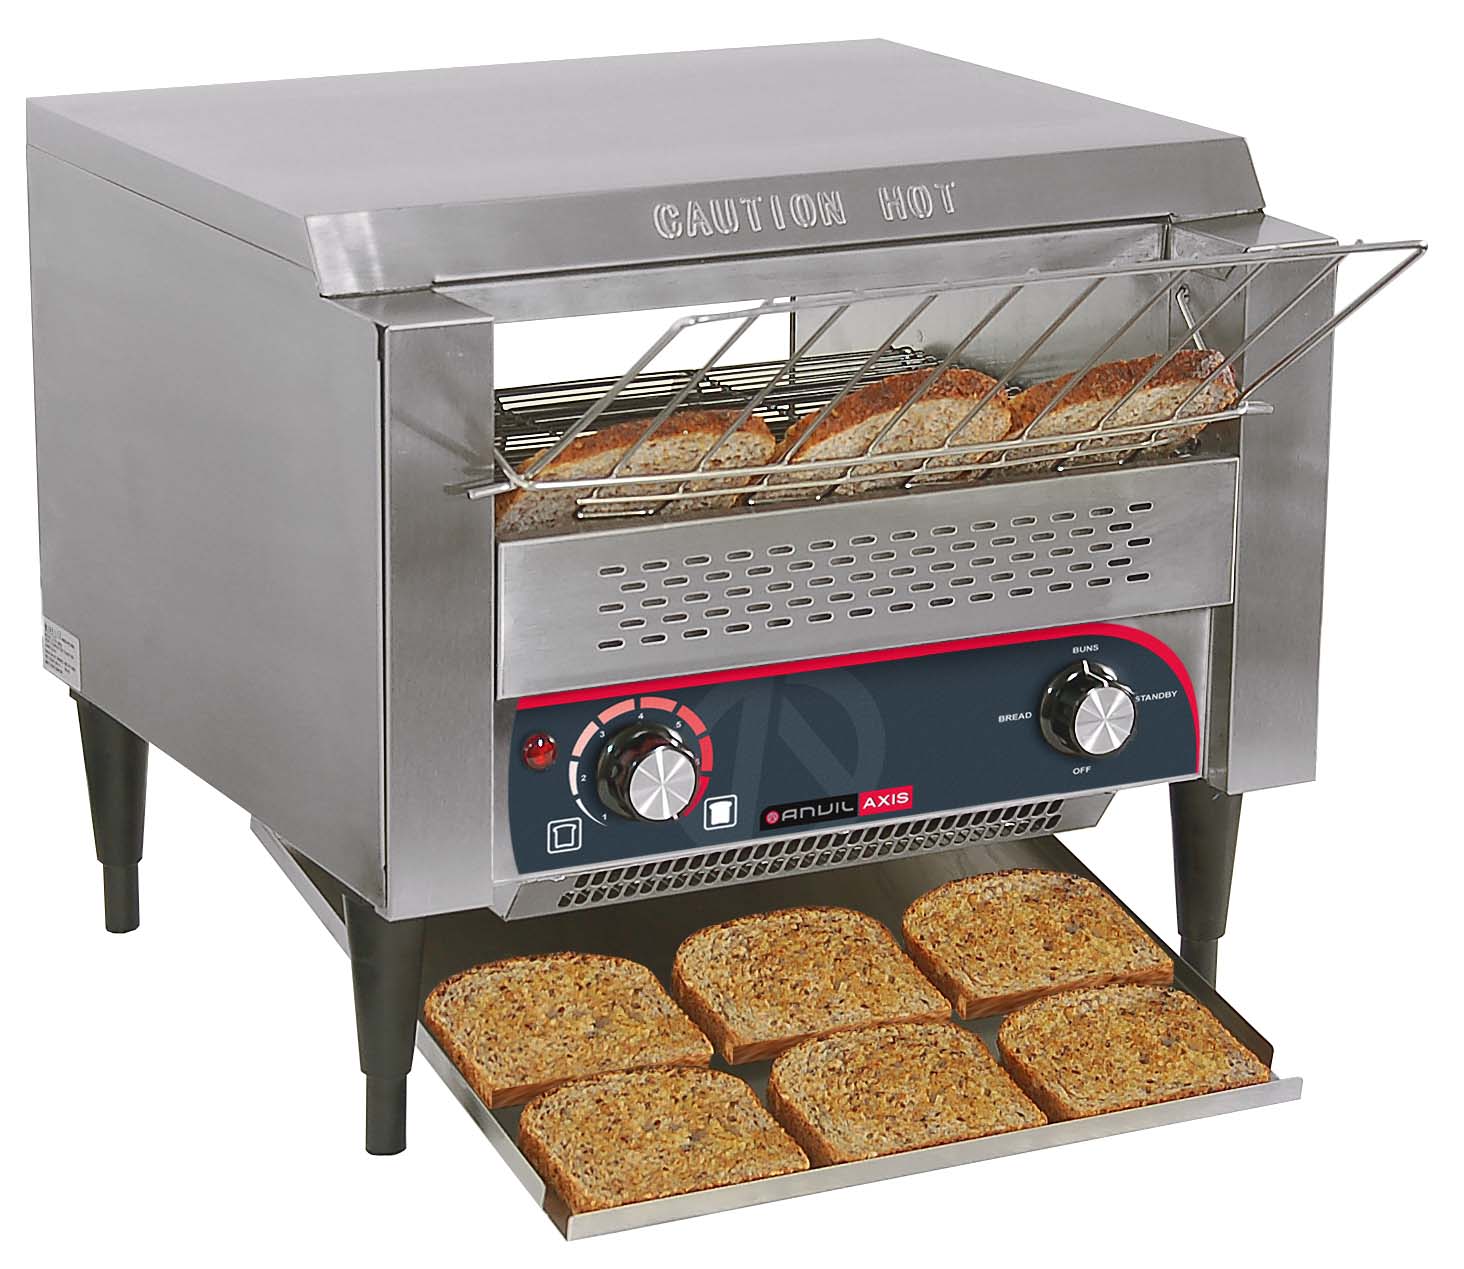 ctk2002--conveyor-toaster-anvil--wide-mouth